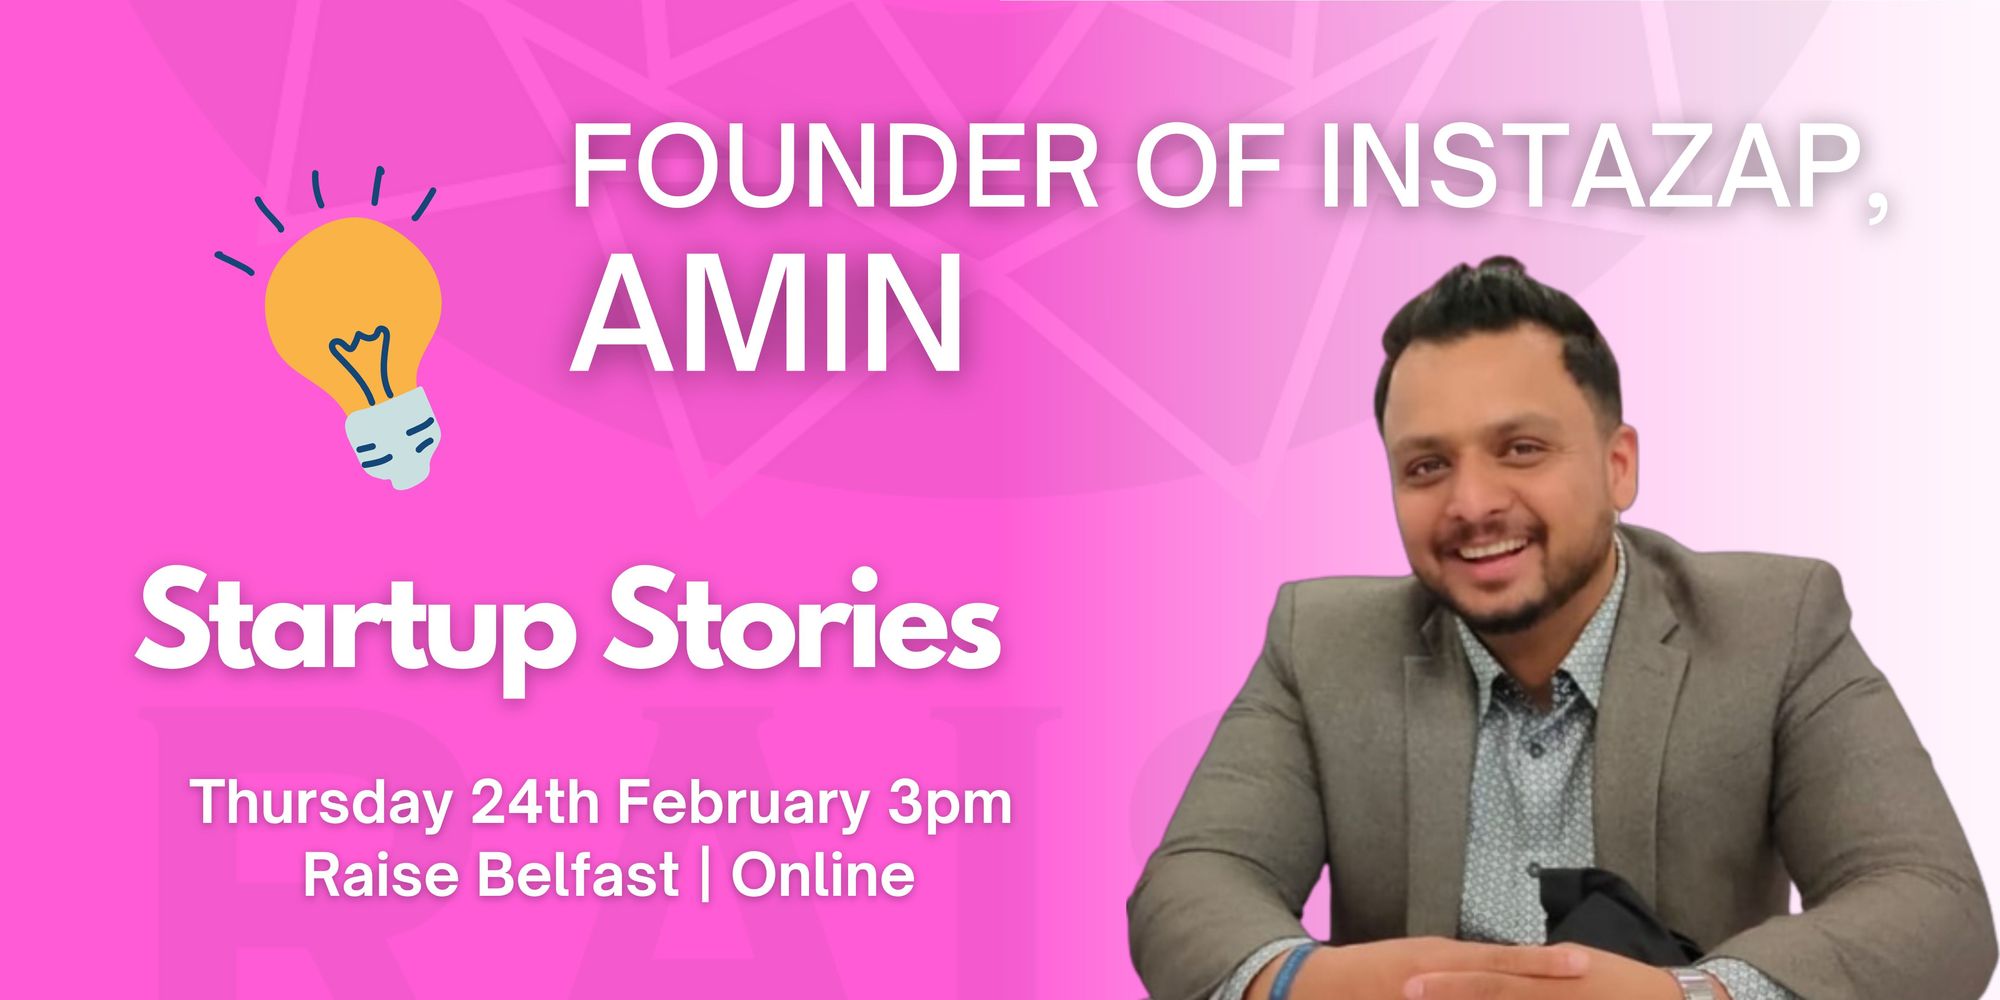 A graphic promoting a Startup Stories talk on 24th February 2023